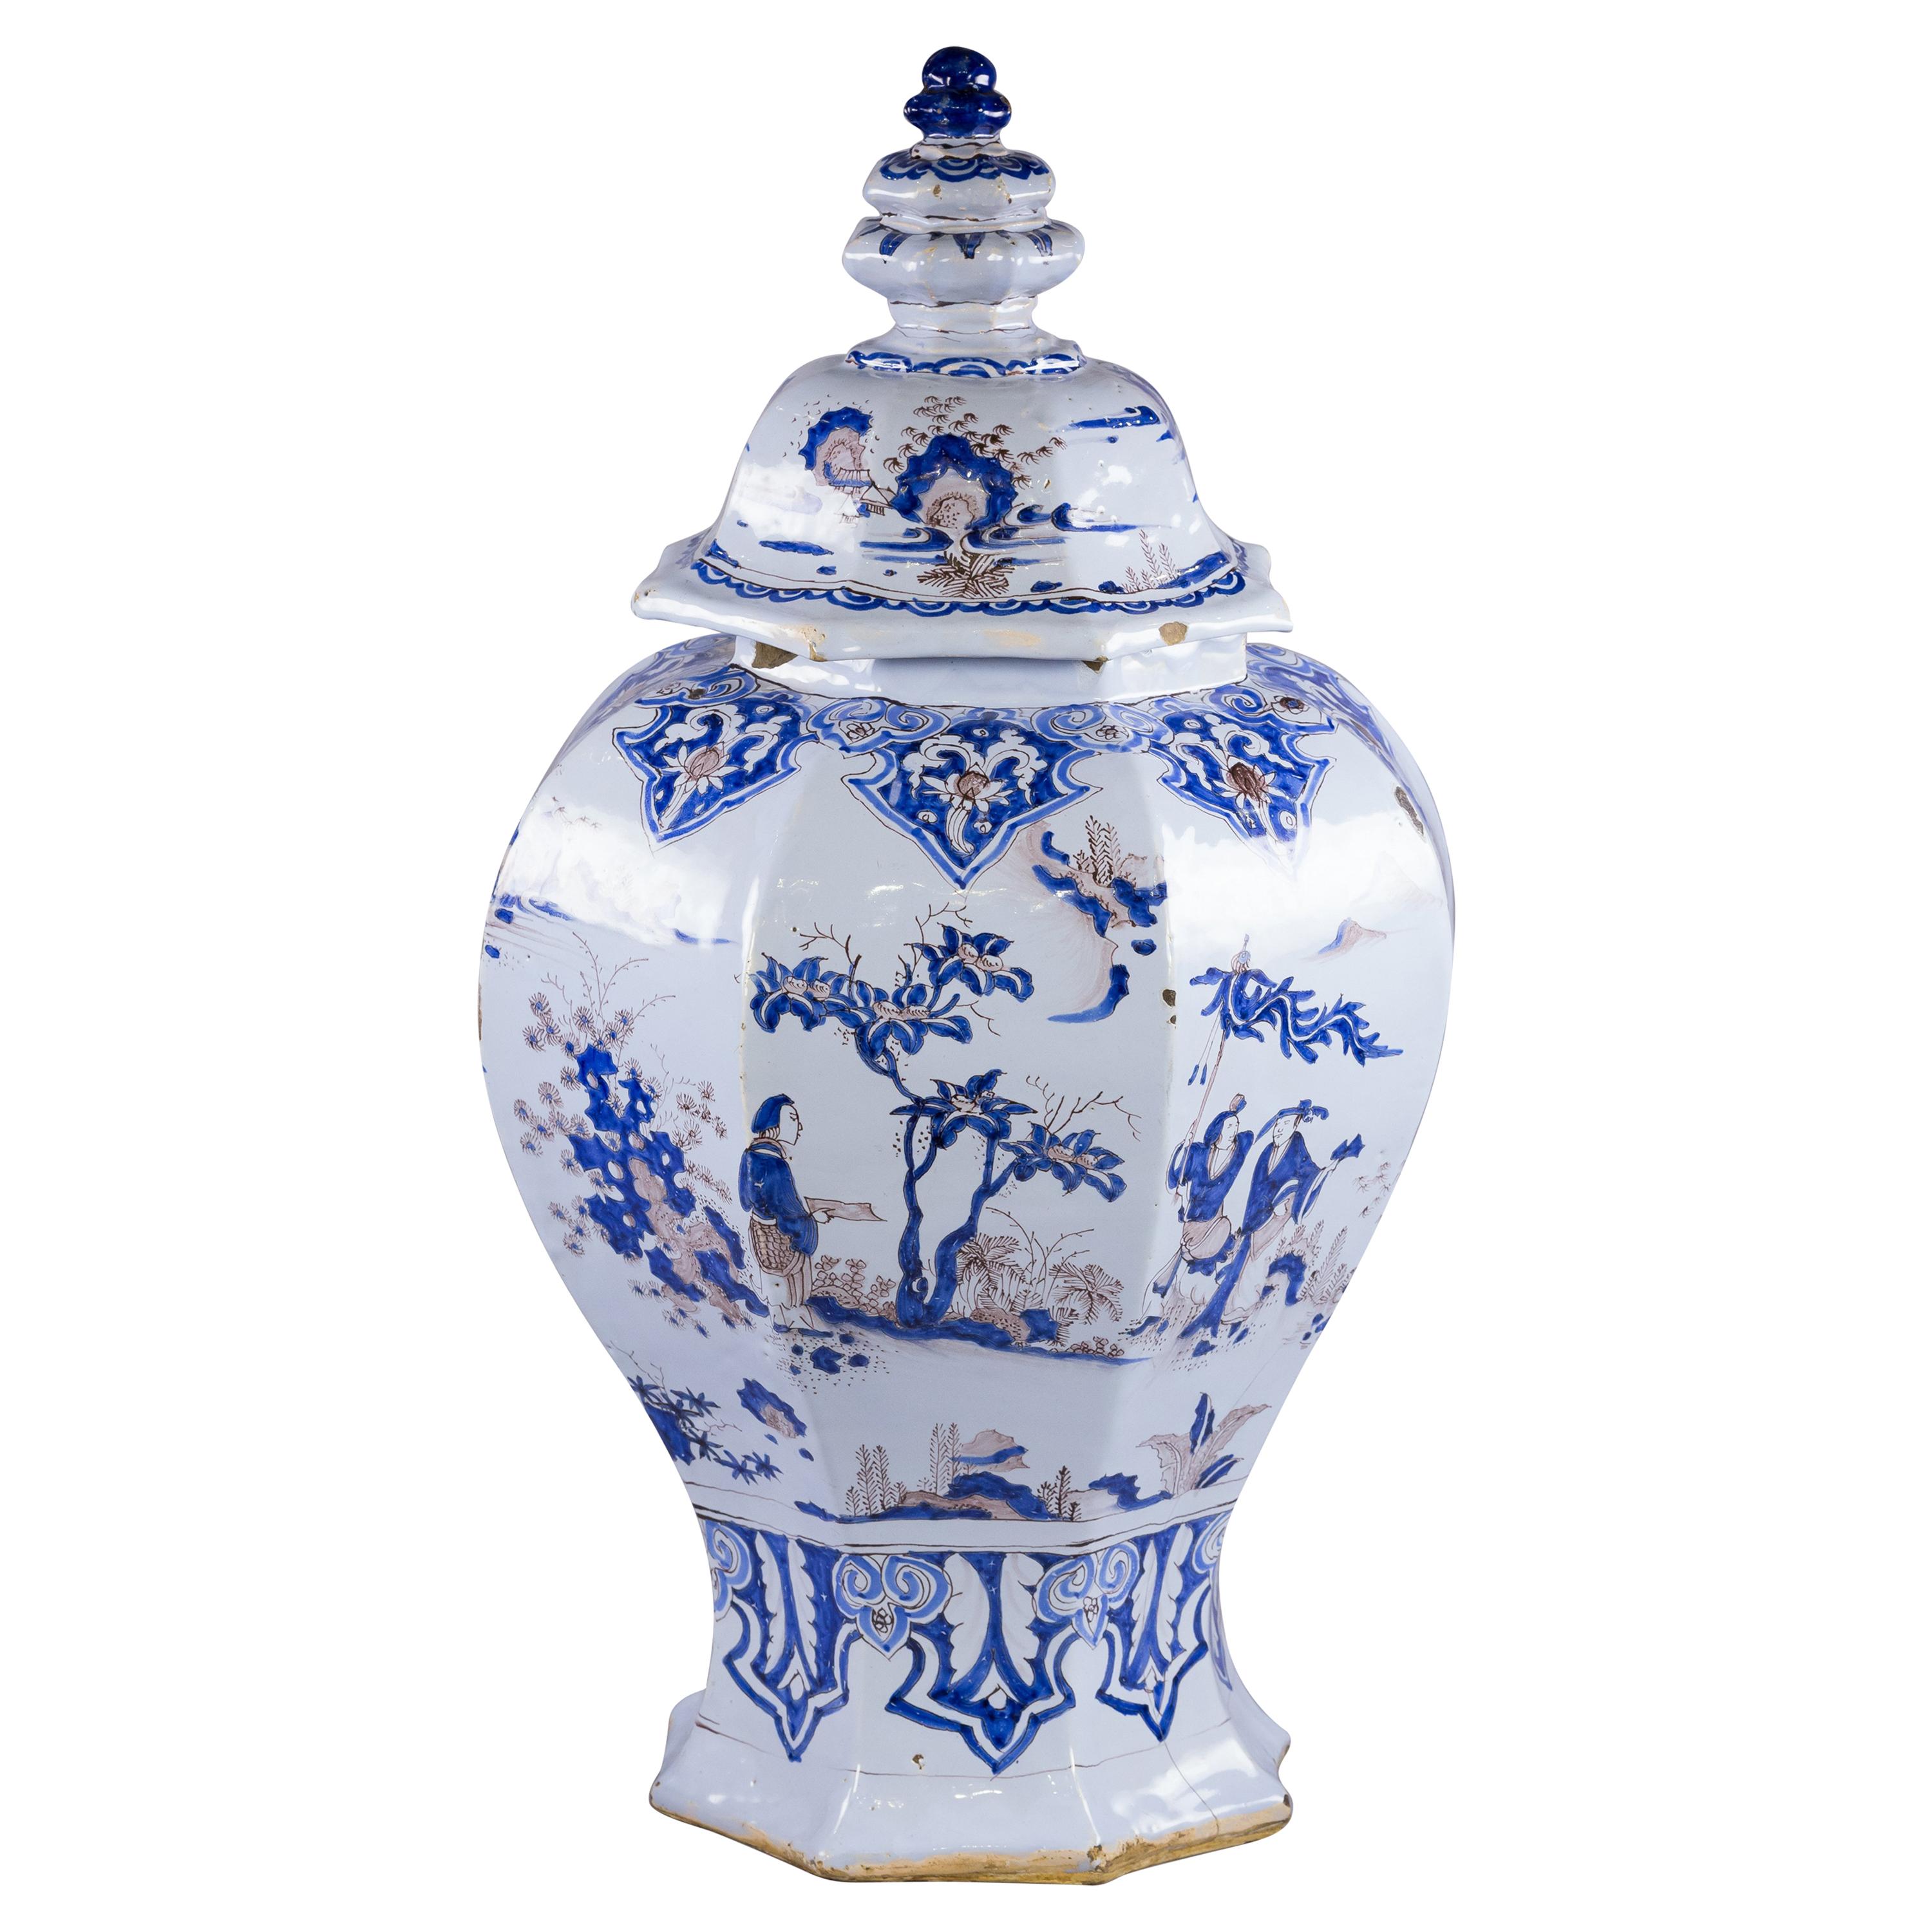 Large and Rare French Faience Chinoiserie Covered Temple Jar, Nevers, circa 1740 For Sale